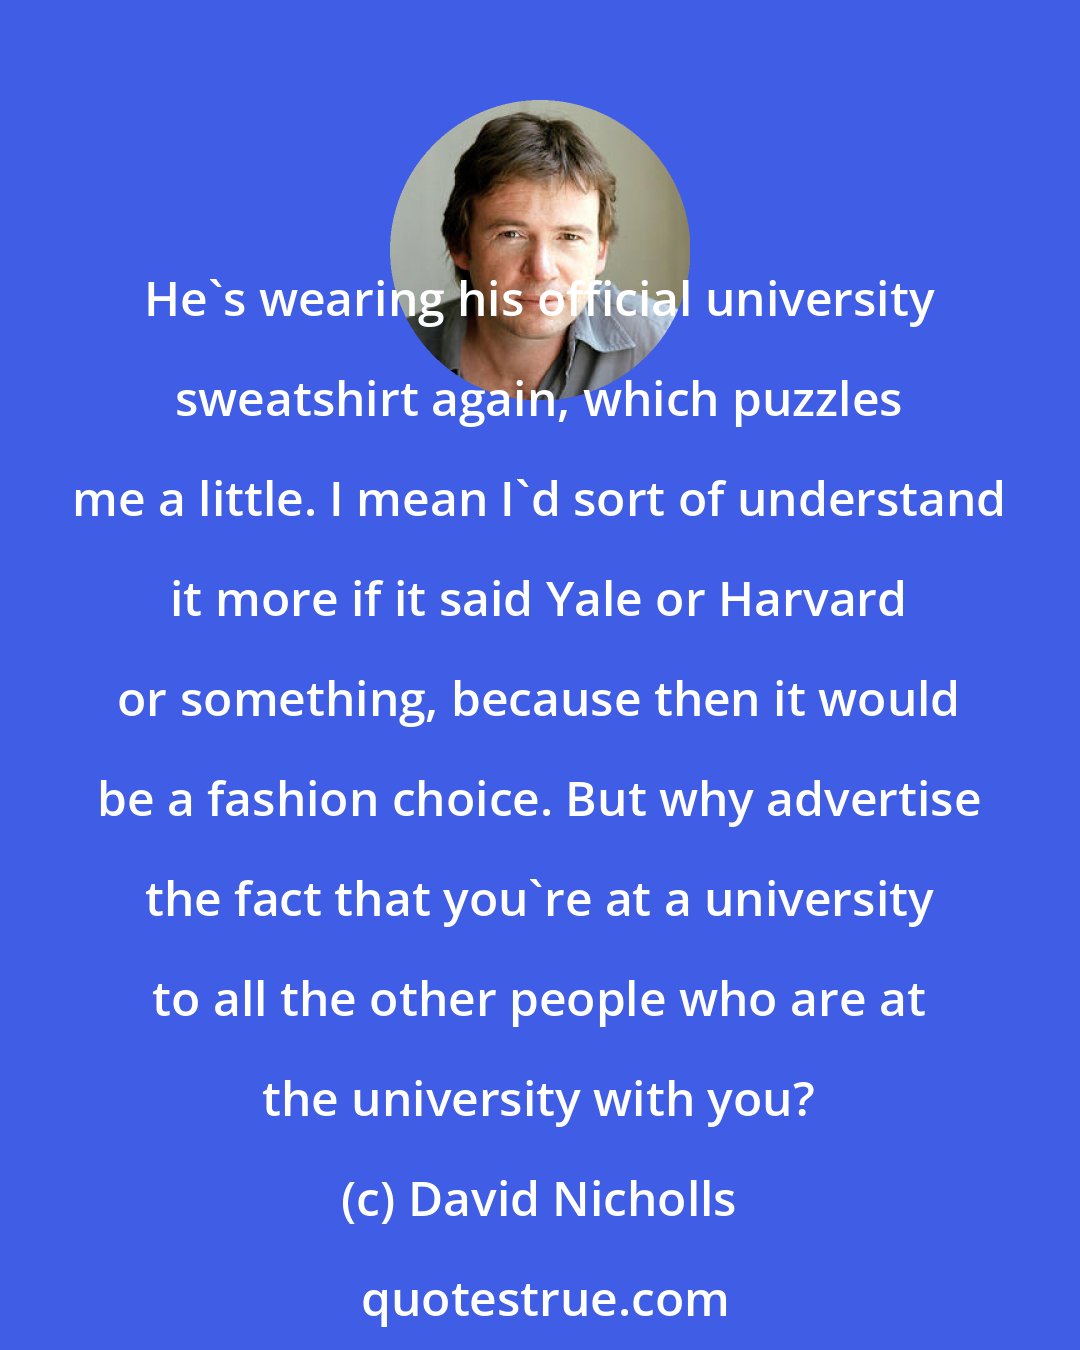 David Nicholls: He's wearing his official university sweatshirt again, which puzzles me a little. I mean I'd sort of understand it more if it said Yale or Harvard or something, because then it would be a fashion choice. But why advertise the fact that you're at a university to all the other people who are at the university with you?